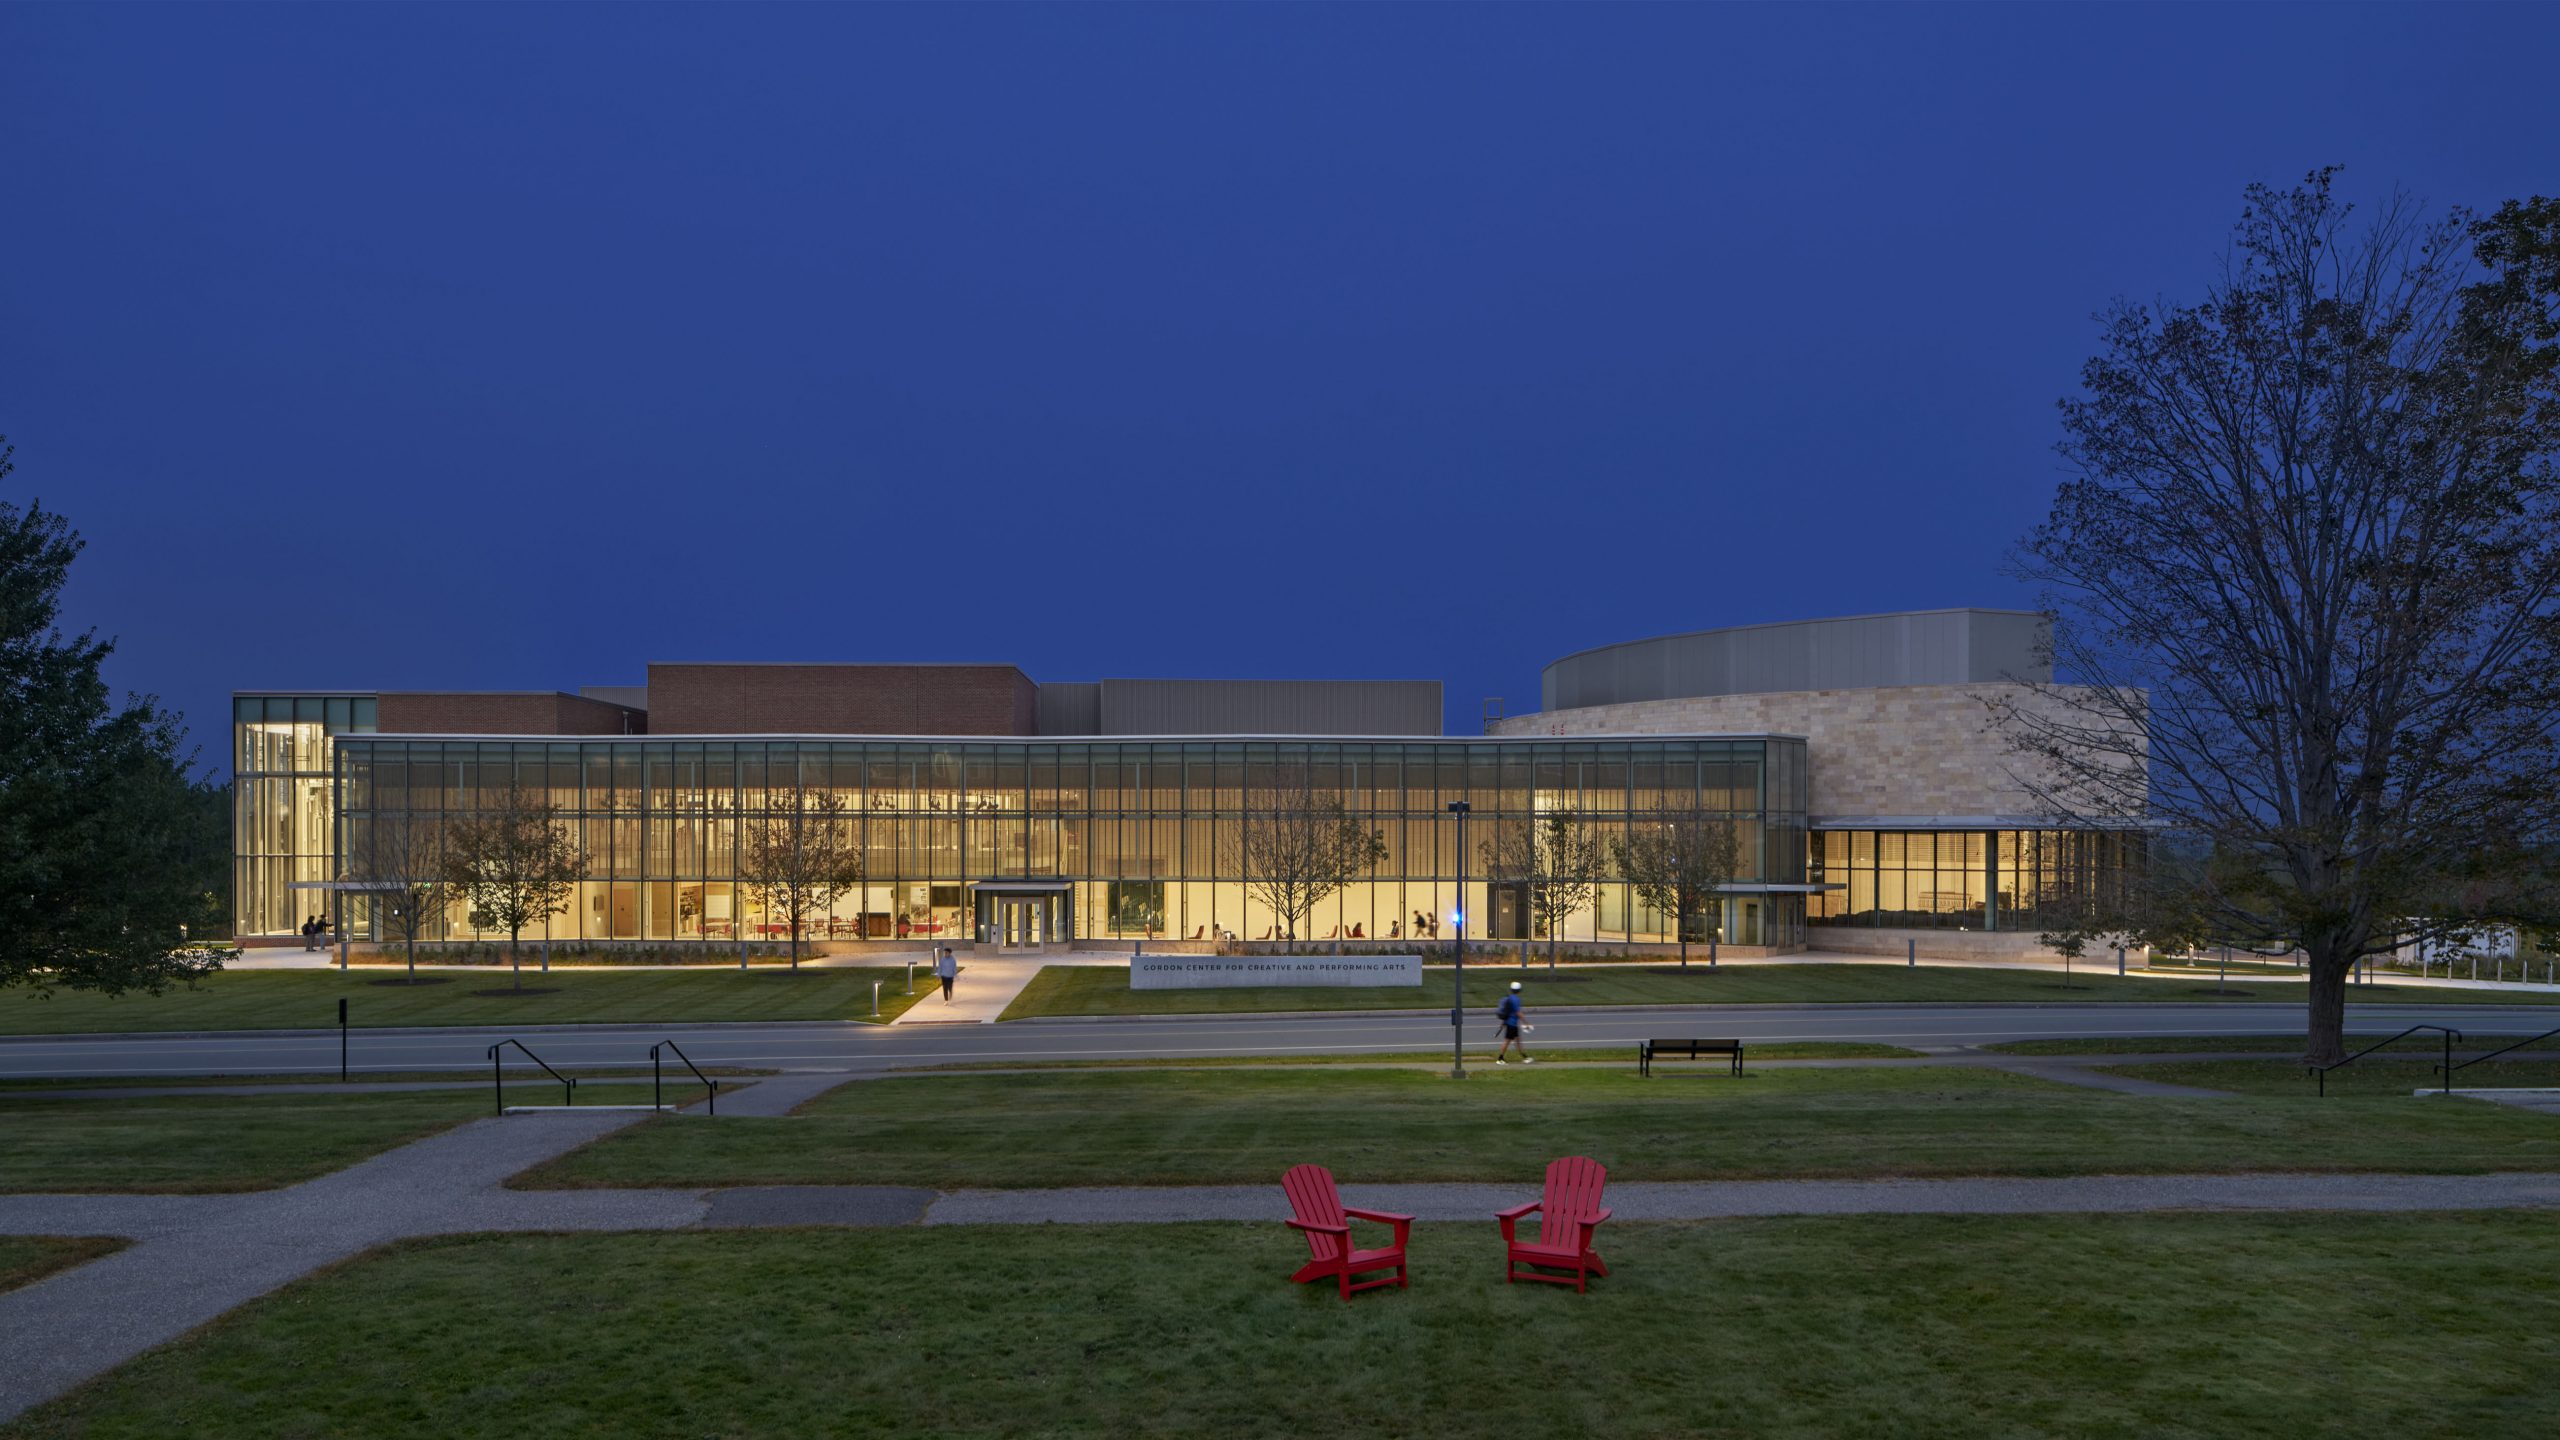 Exterior view of the Colby College Gordon Center for Creative & Performing Arts